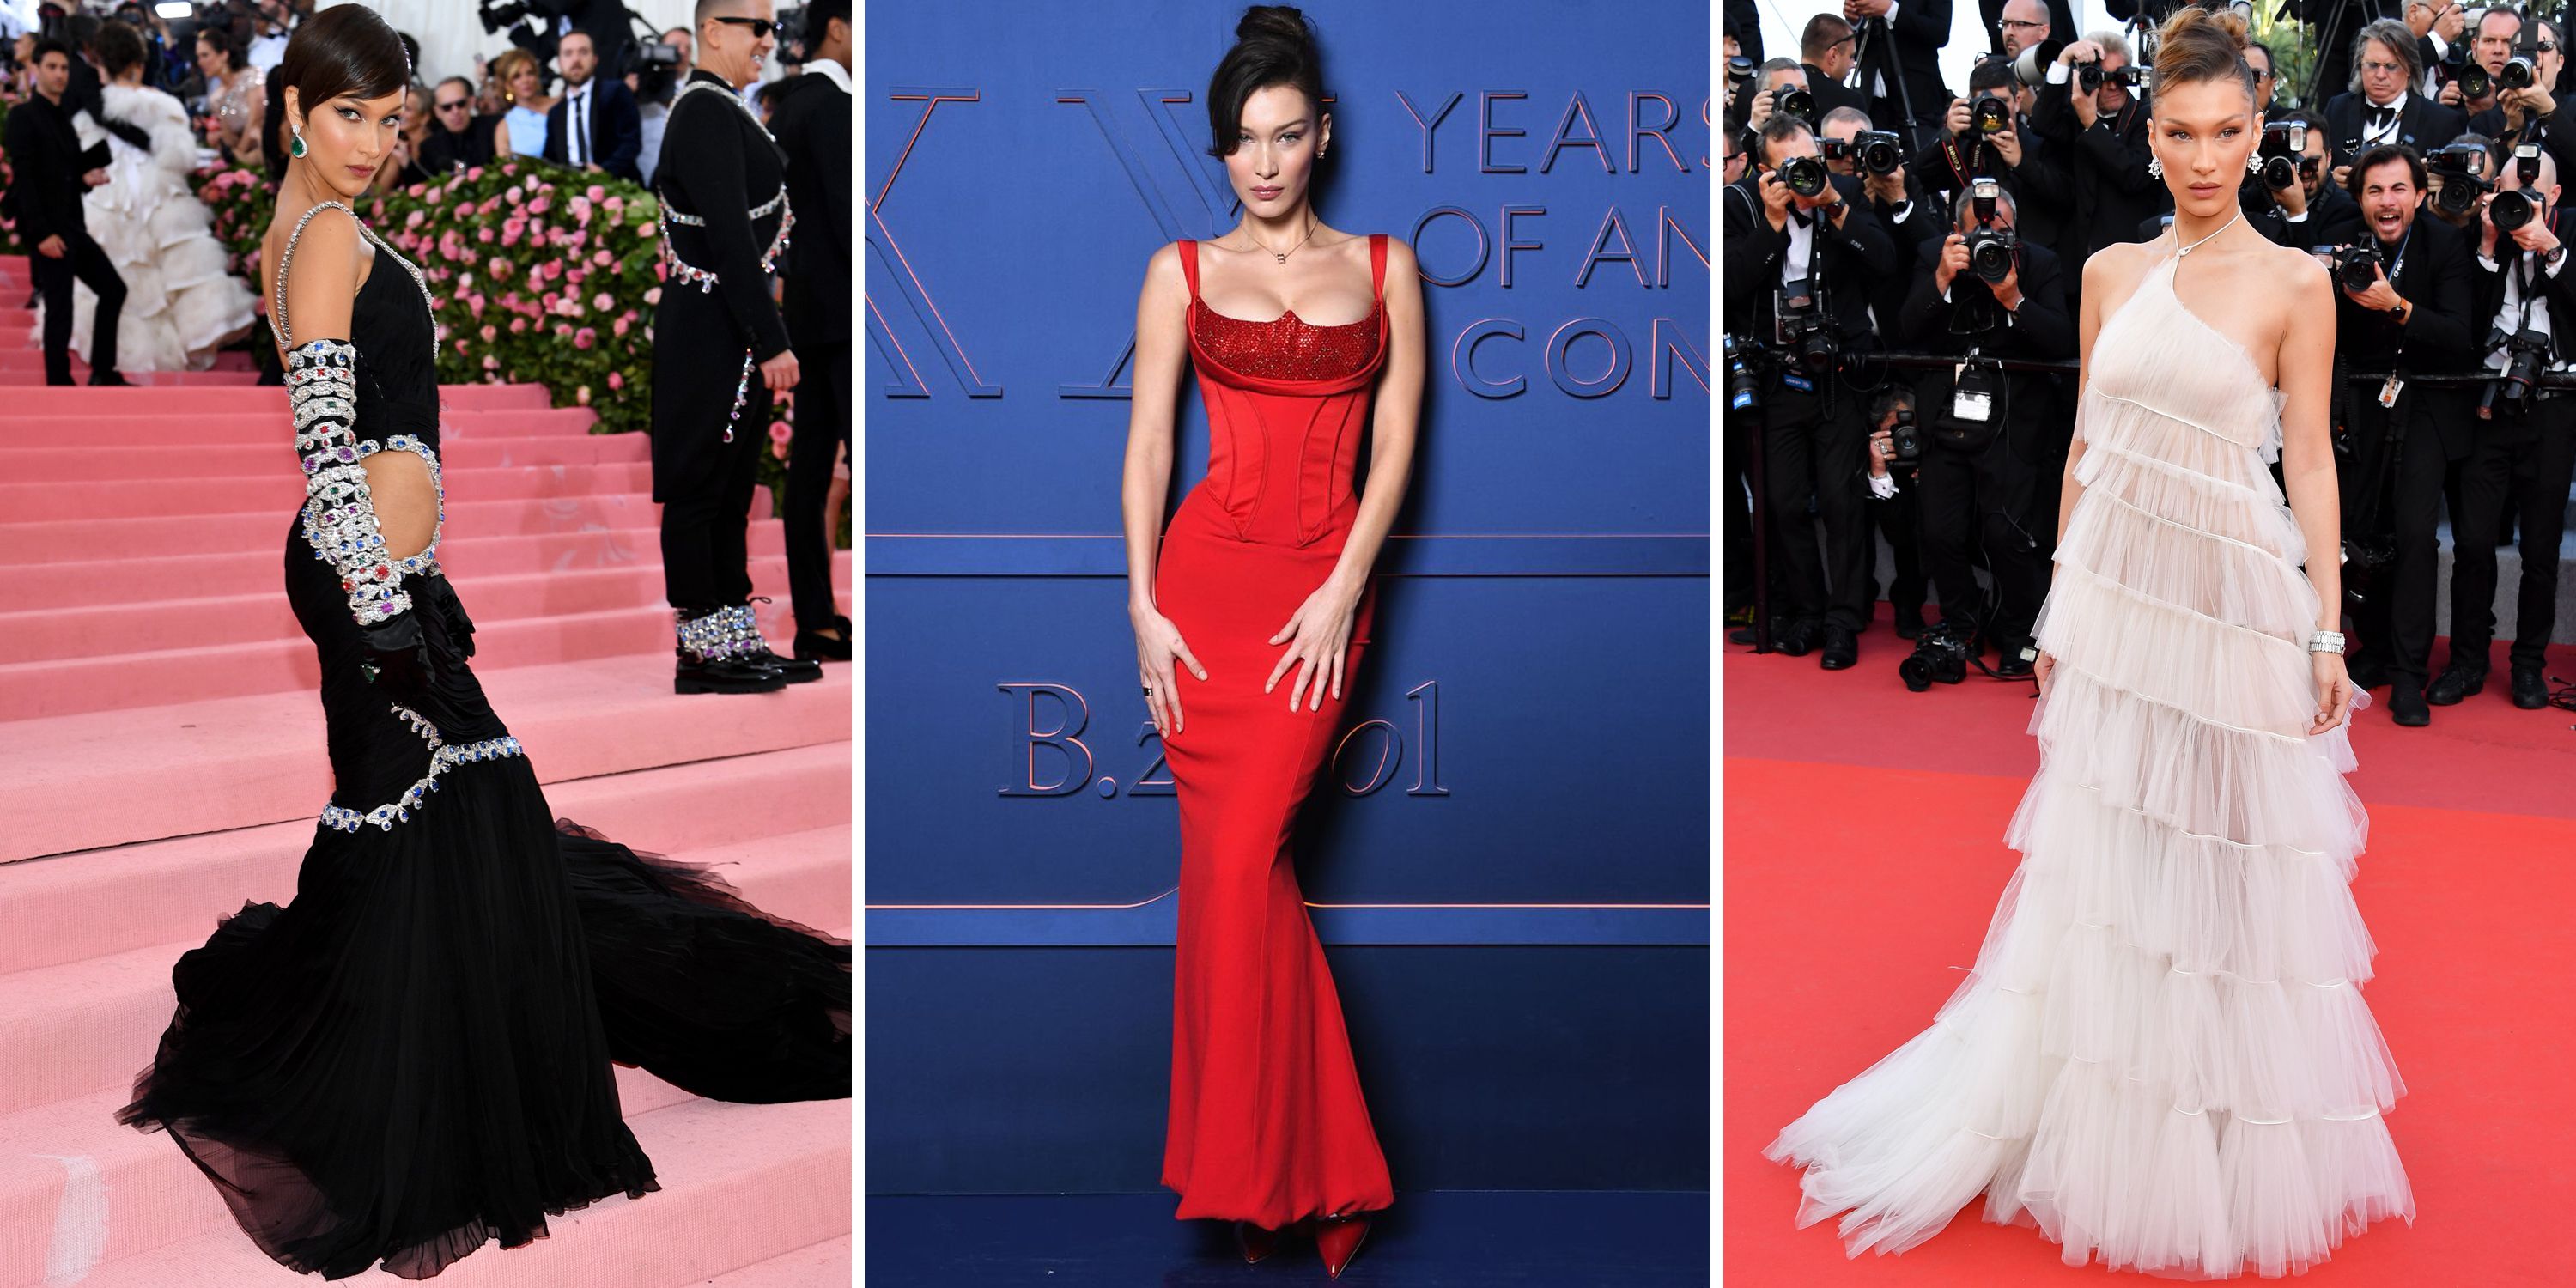 Bella Hadid Wore A Second Vintage Versace Dress At Cannes